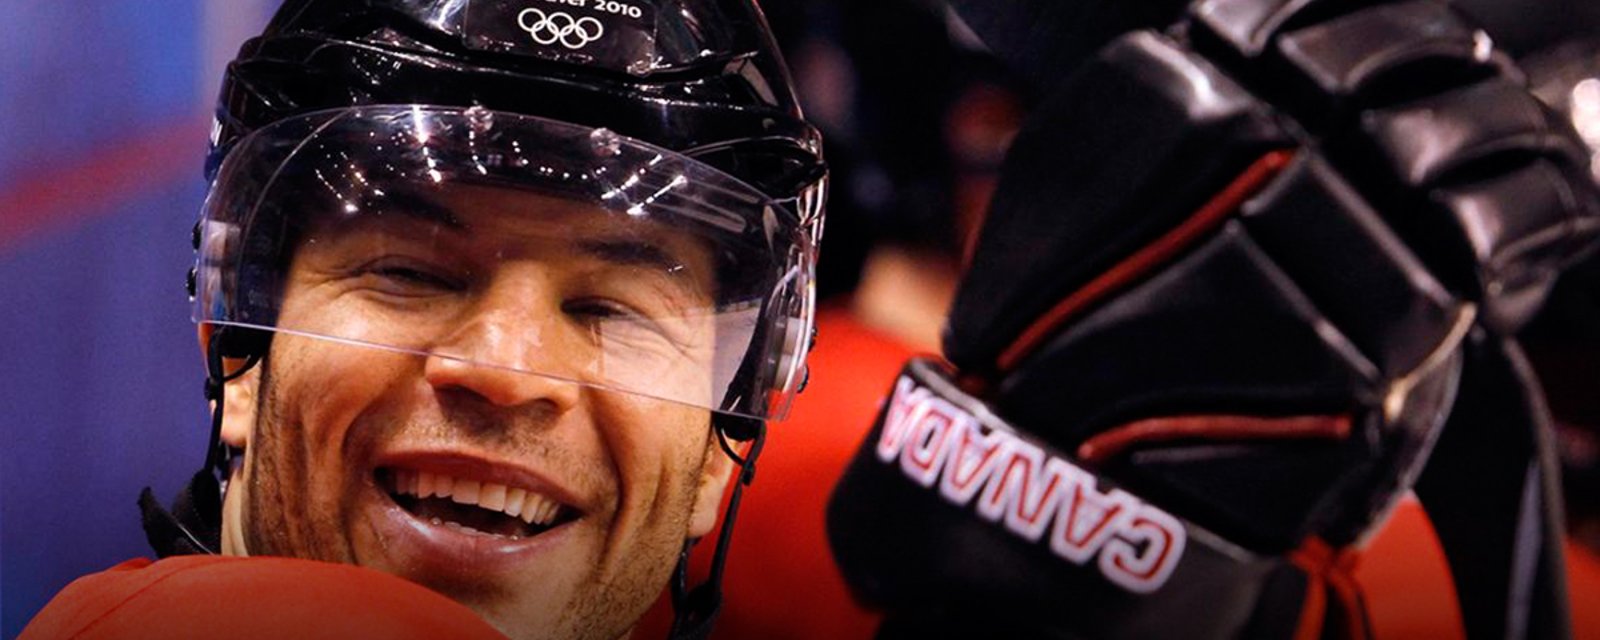 Your Call: Should Iginla be Canada’s captain?